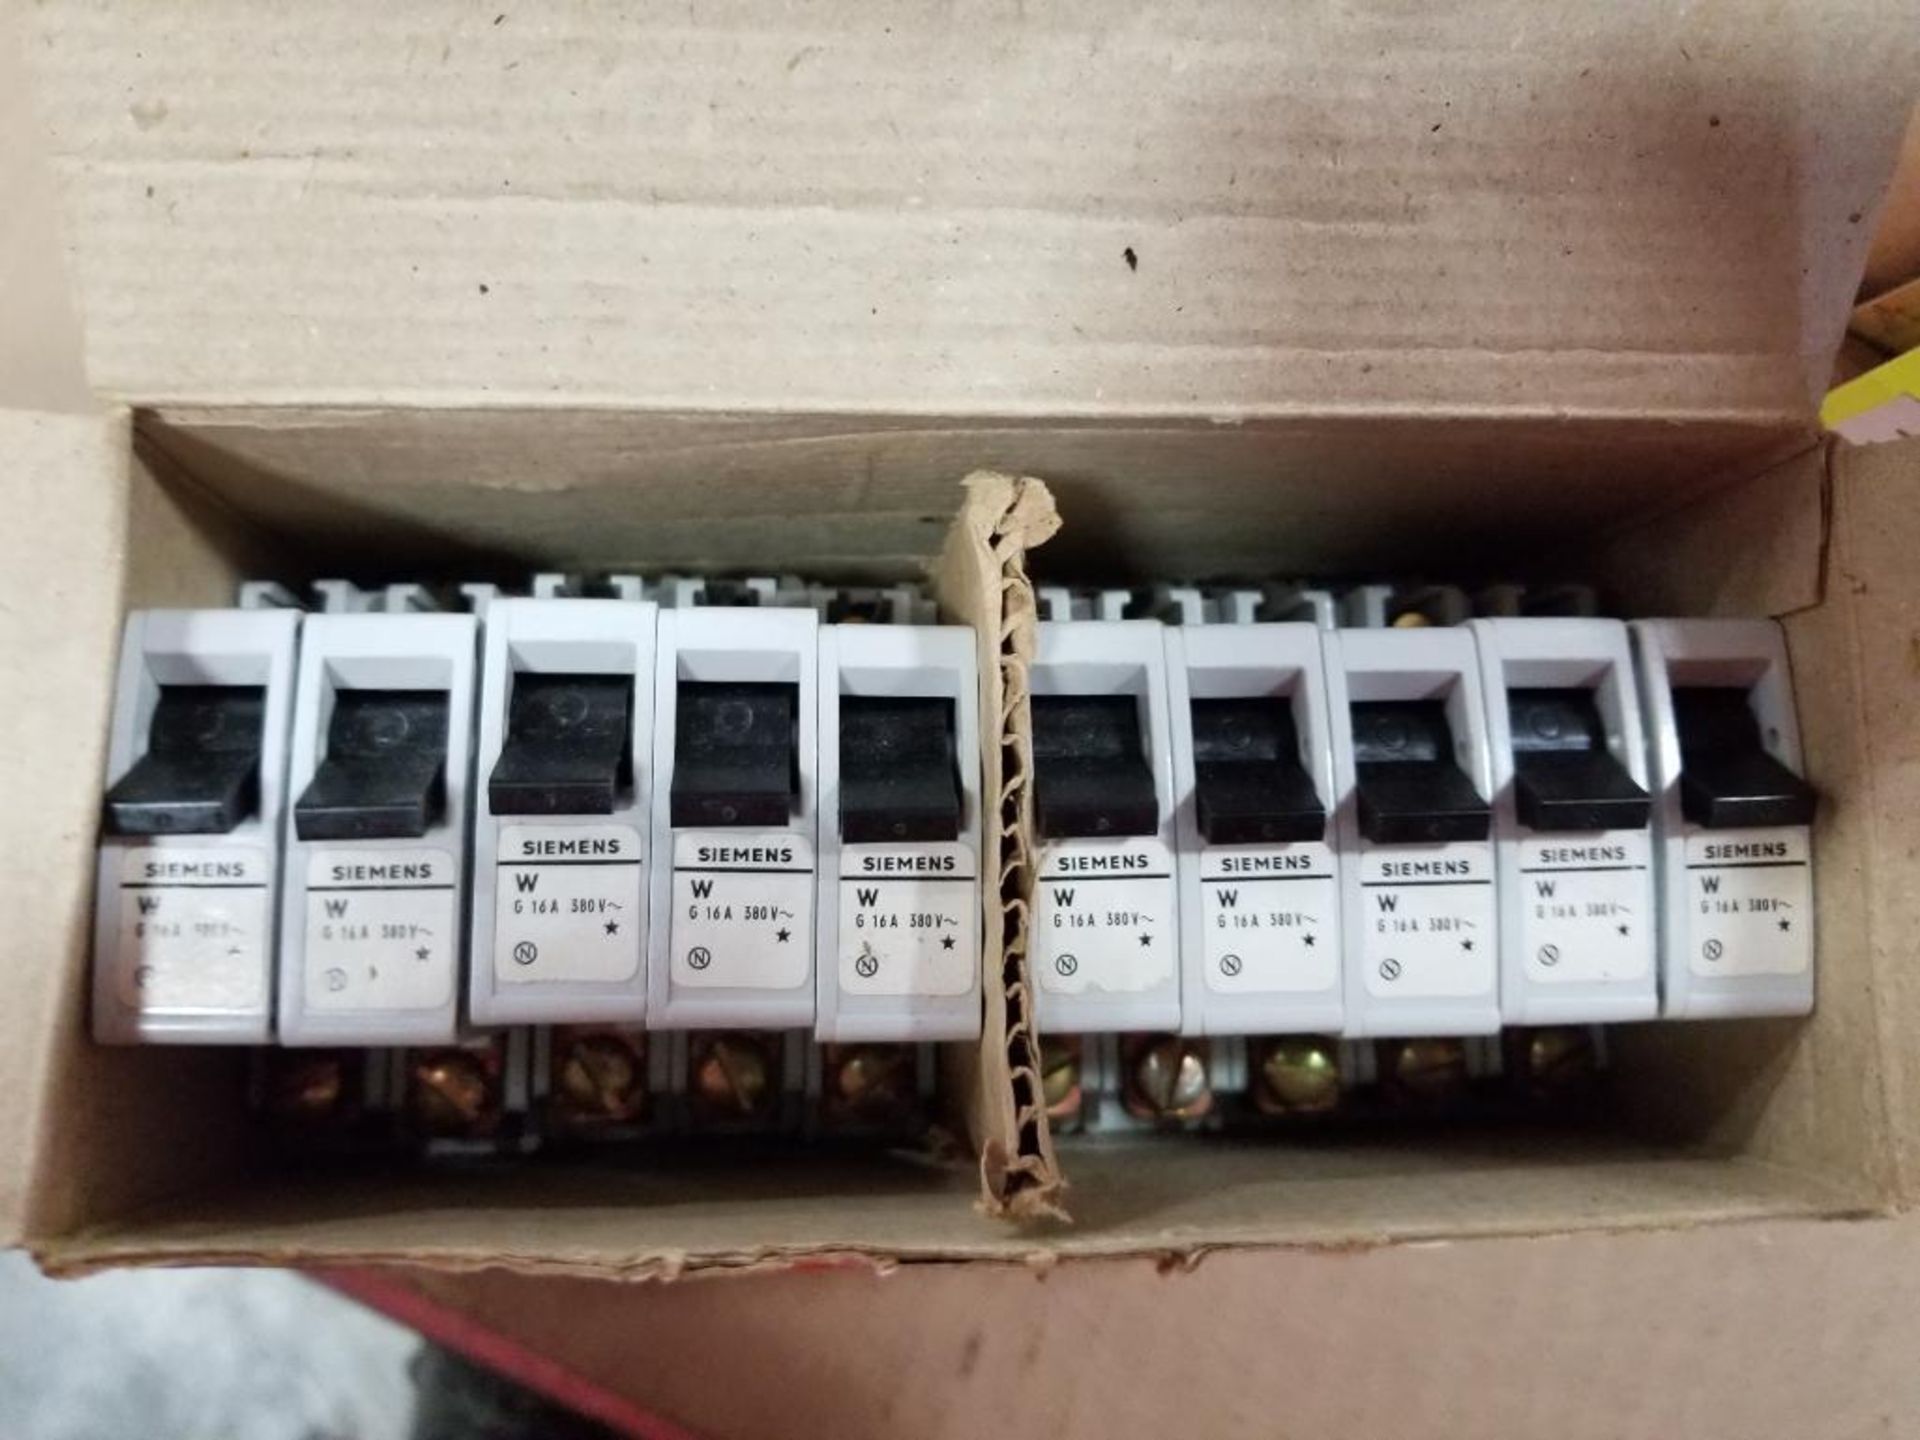 Qty 60 - Siemens 5SP3-132 single pole breaker. 10 PC boxes. New in box. - Image 4 of 5